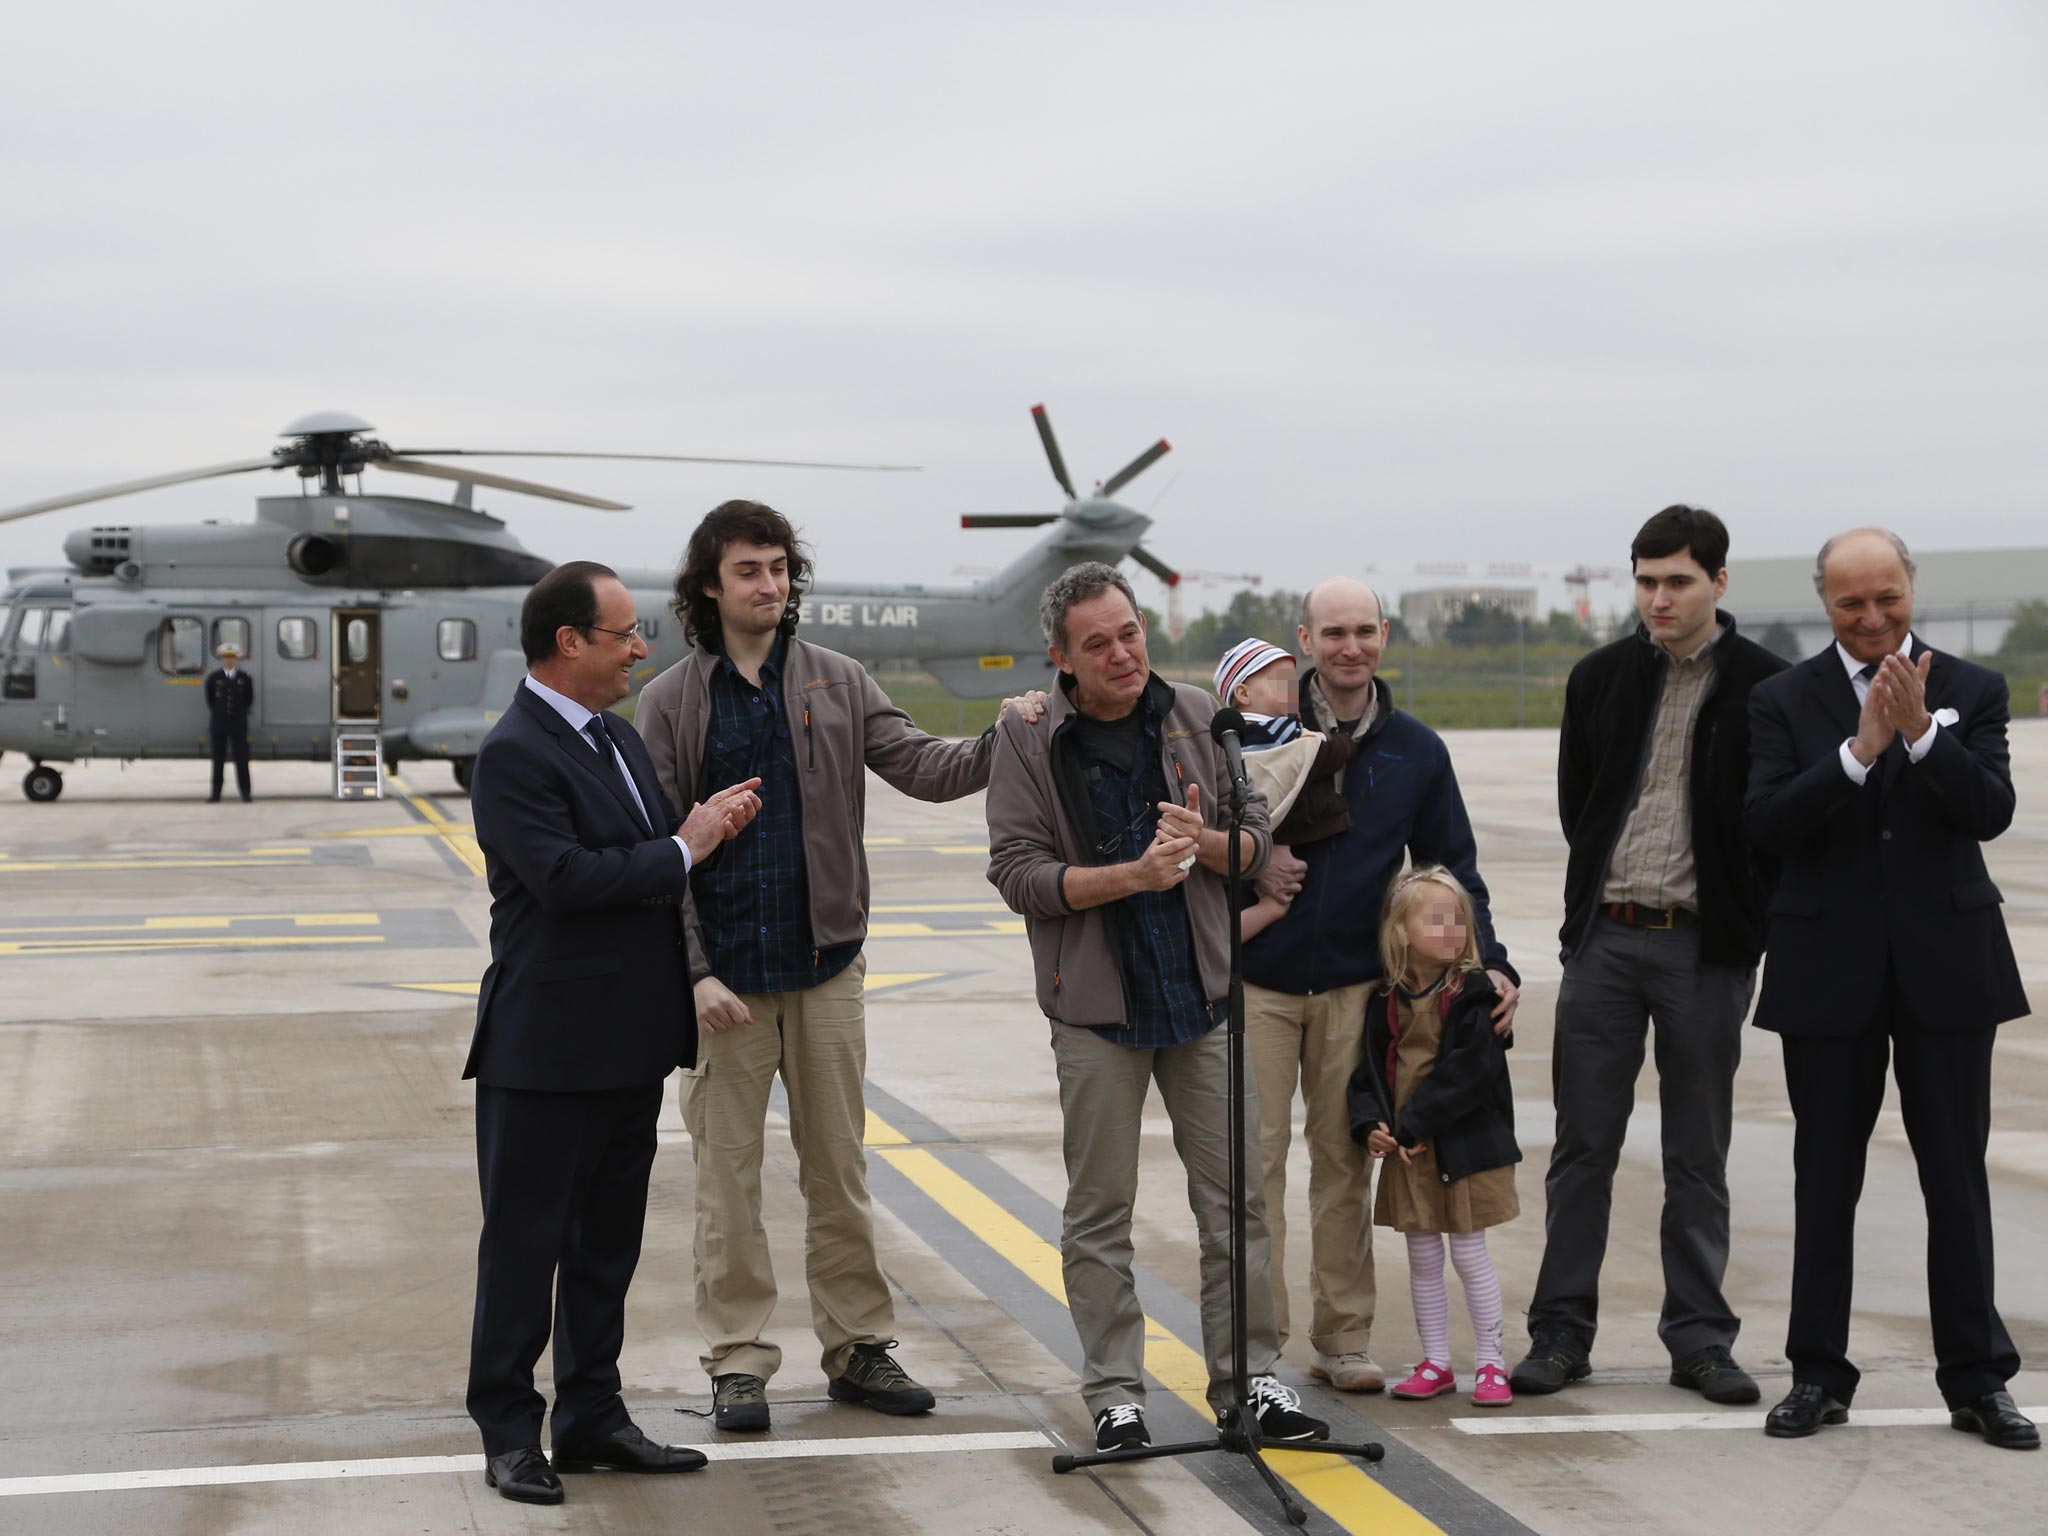 Safe return: French President Francois Hollande (left) greets the freed French journalists as they arrive back in France